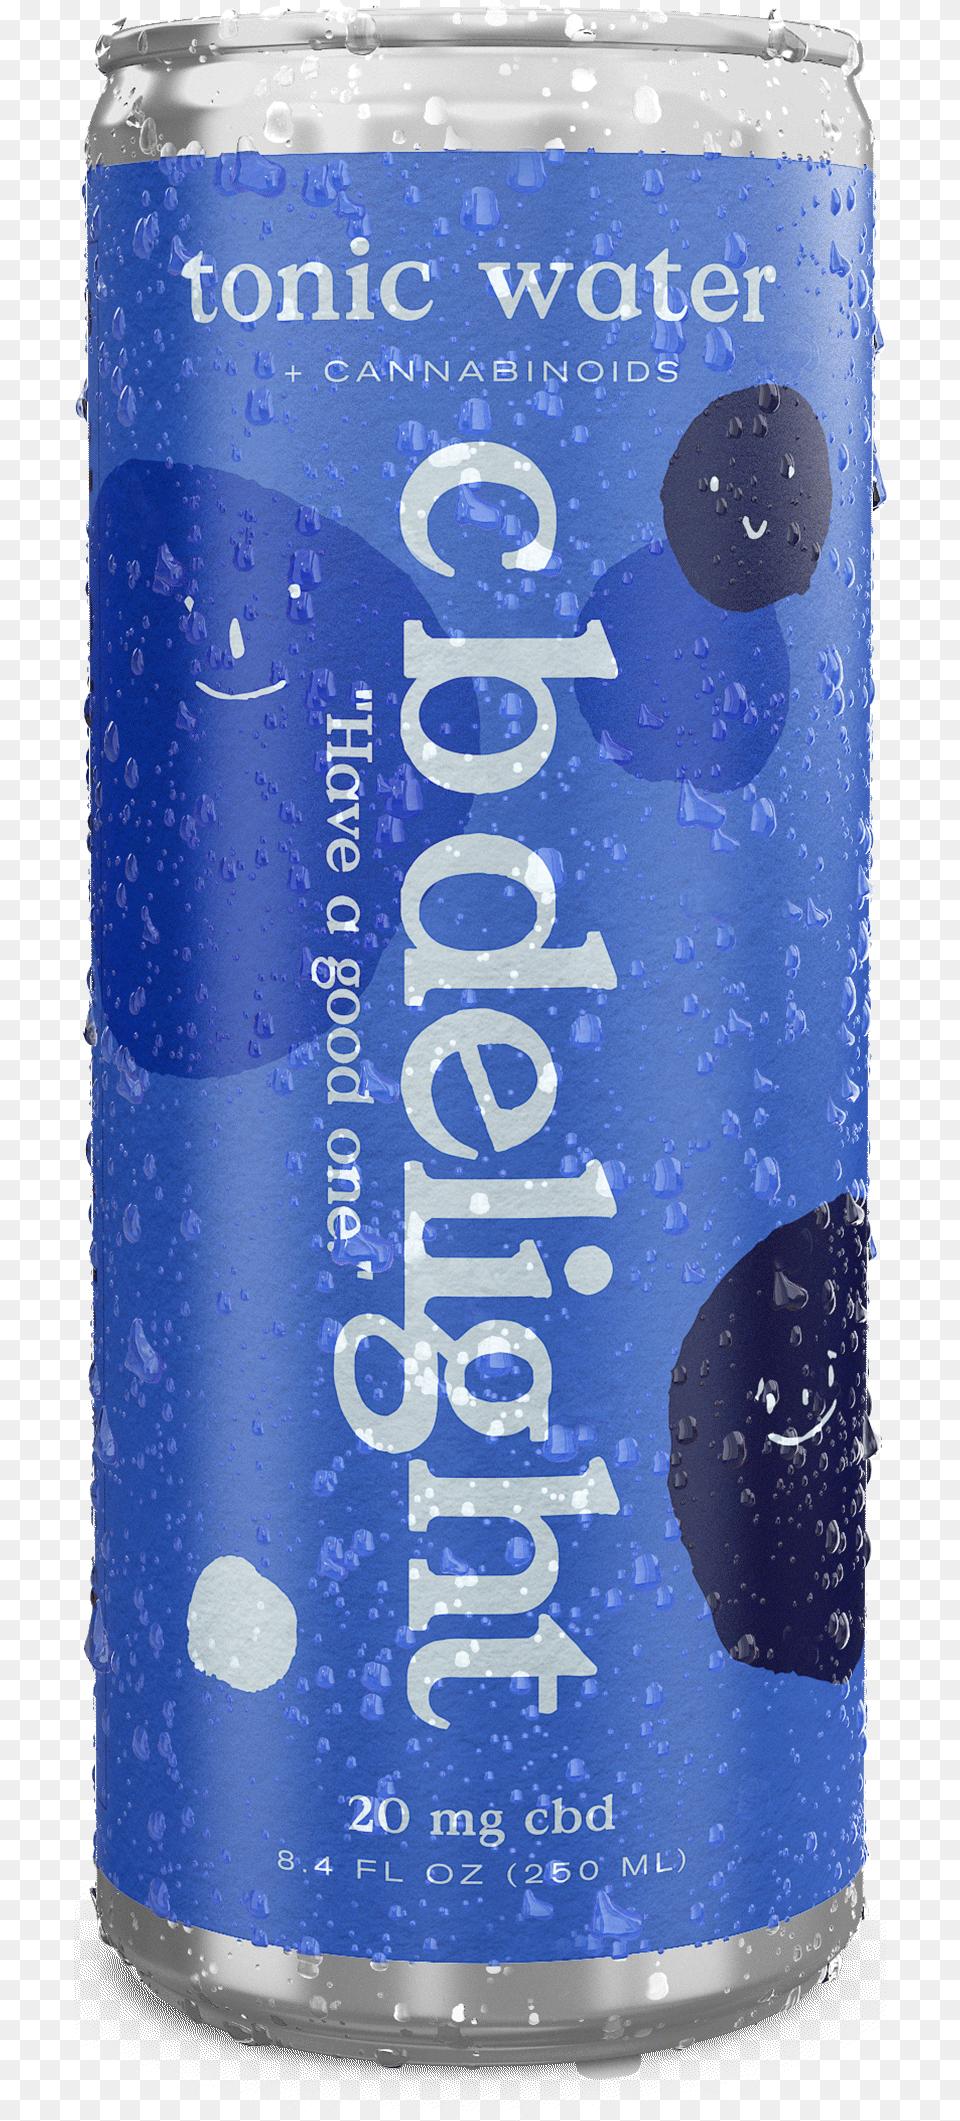 C B Delight Tonic Water U2014 Cbdelight Cbd Infused Beverages Drops Logos, Can, Tin Png Image